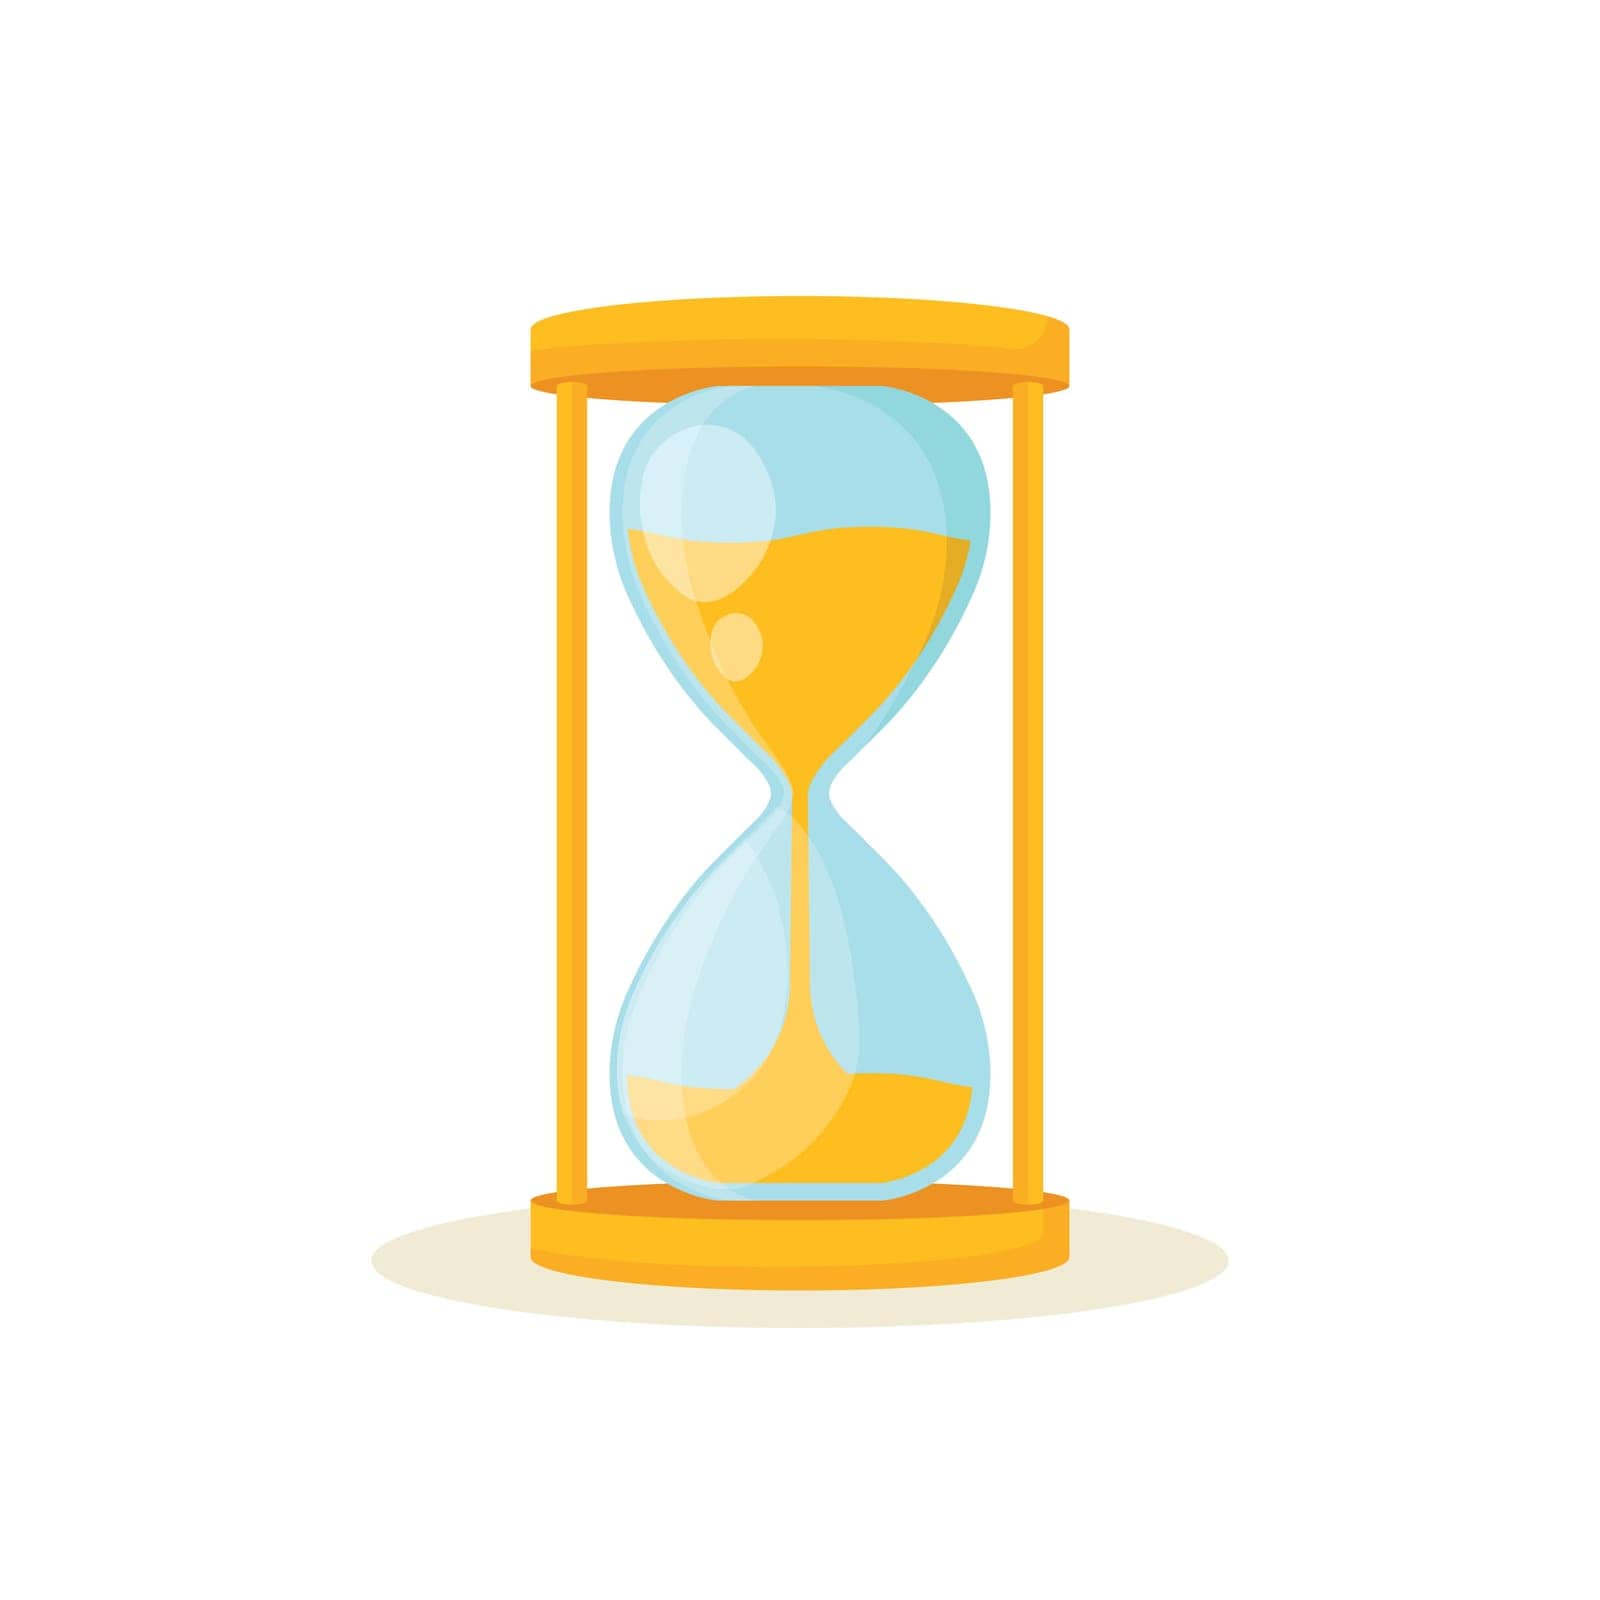 Hourglass icon in flat style. Sandglass vector illustration on isolated background. Sand clock sign business concept. by LysenkoA